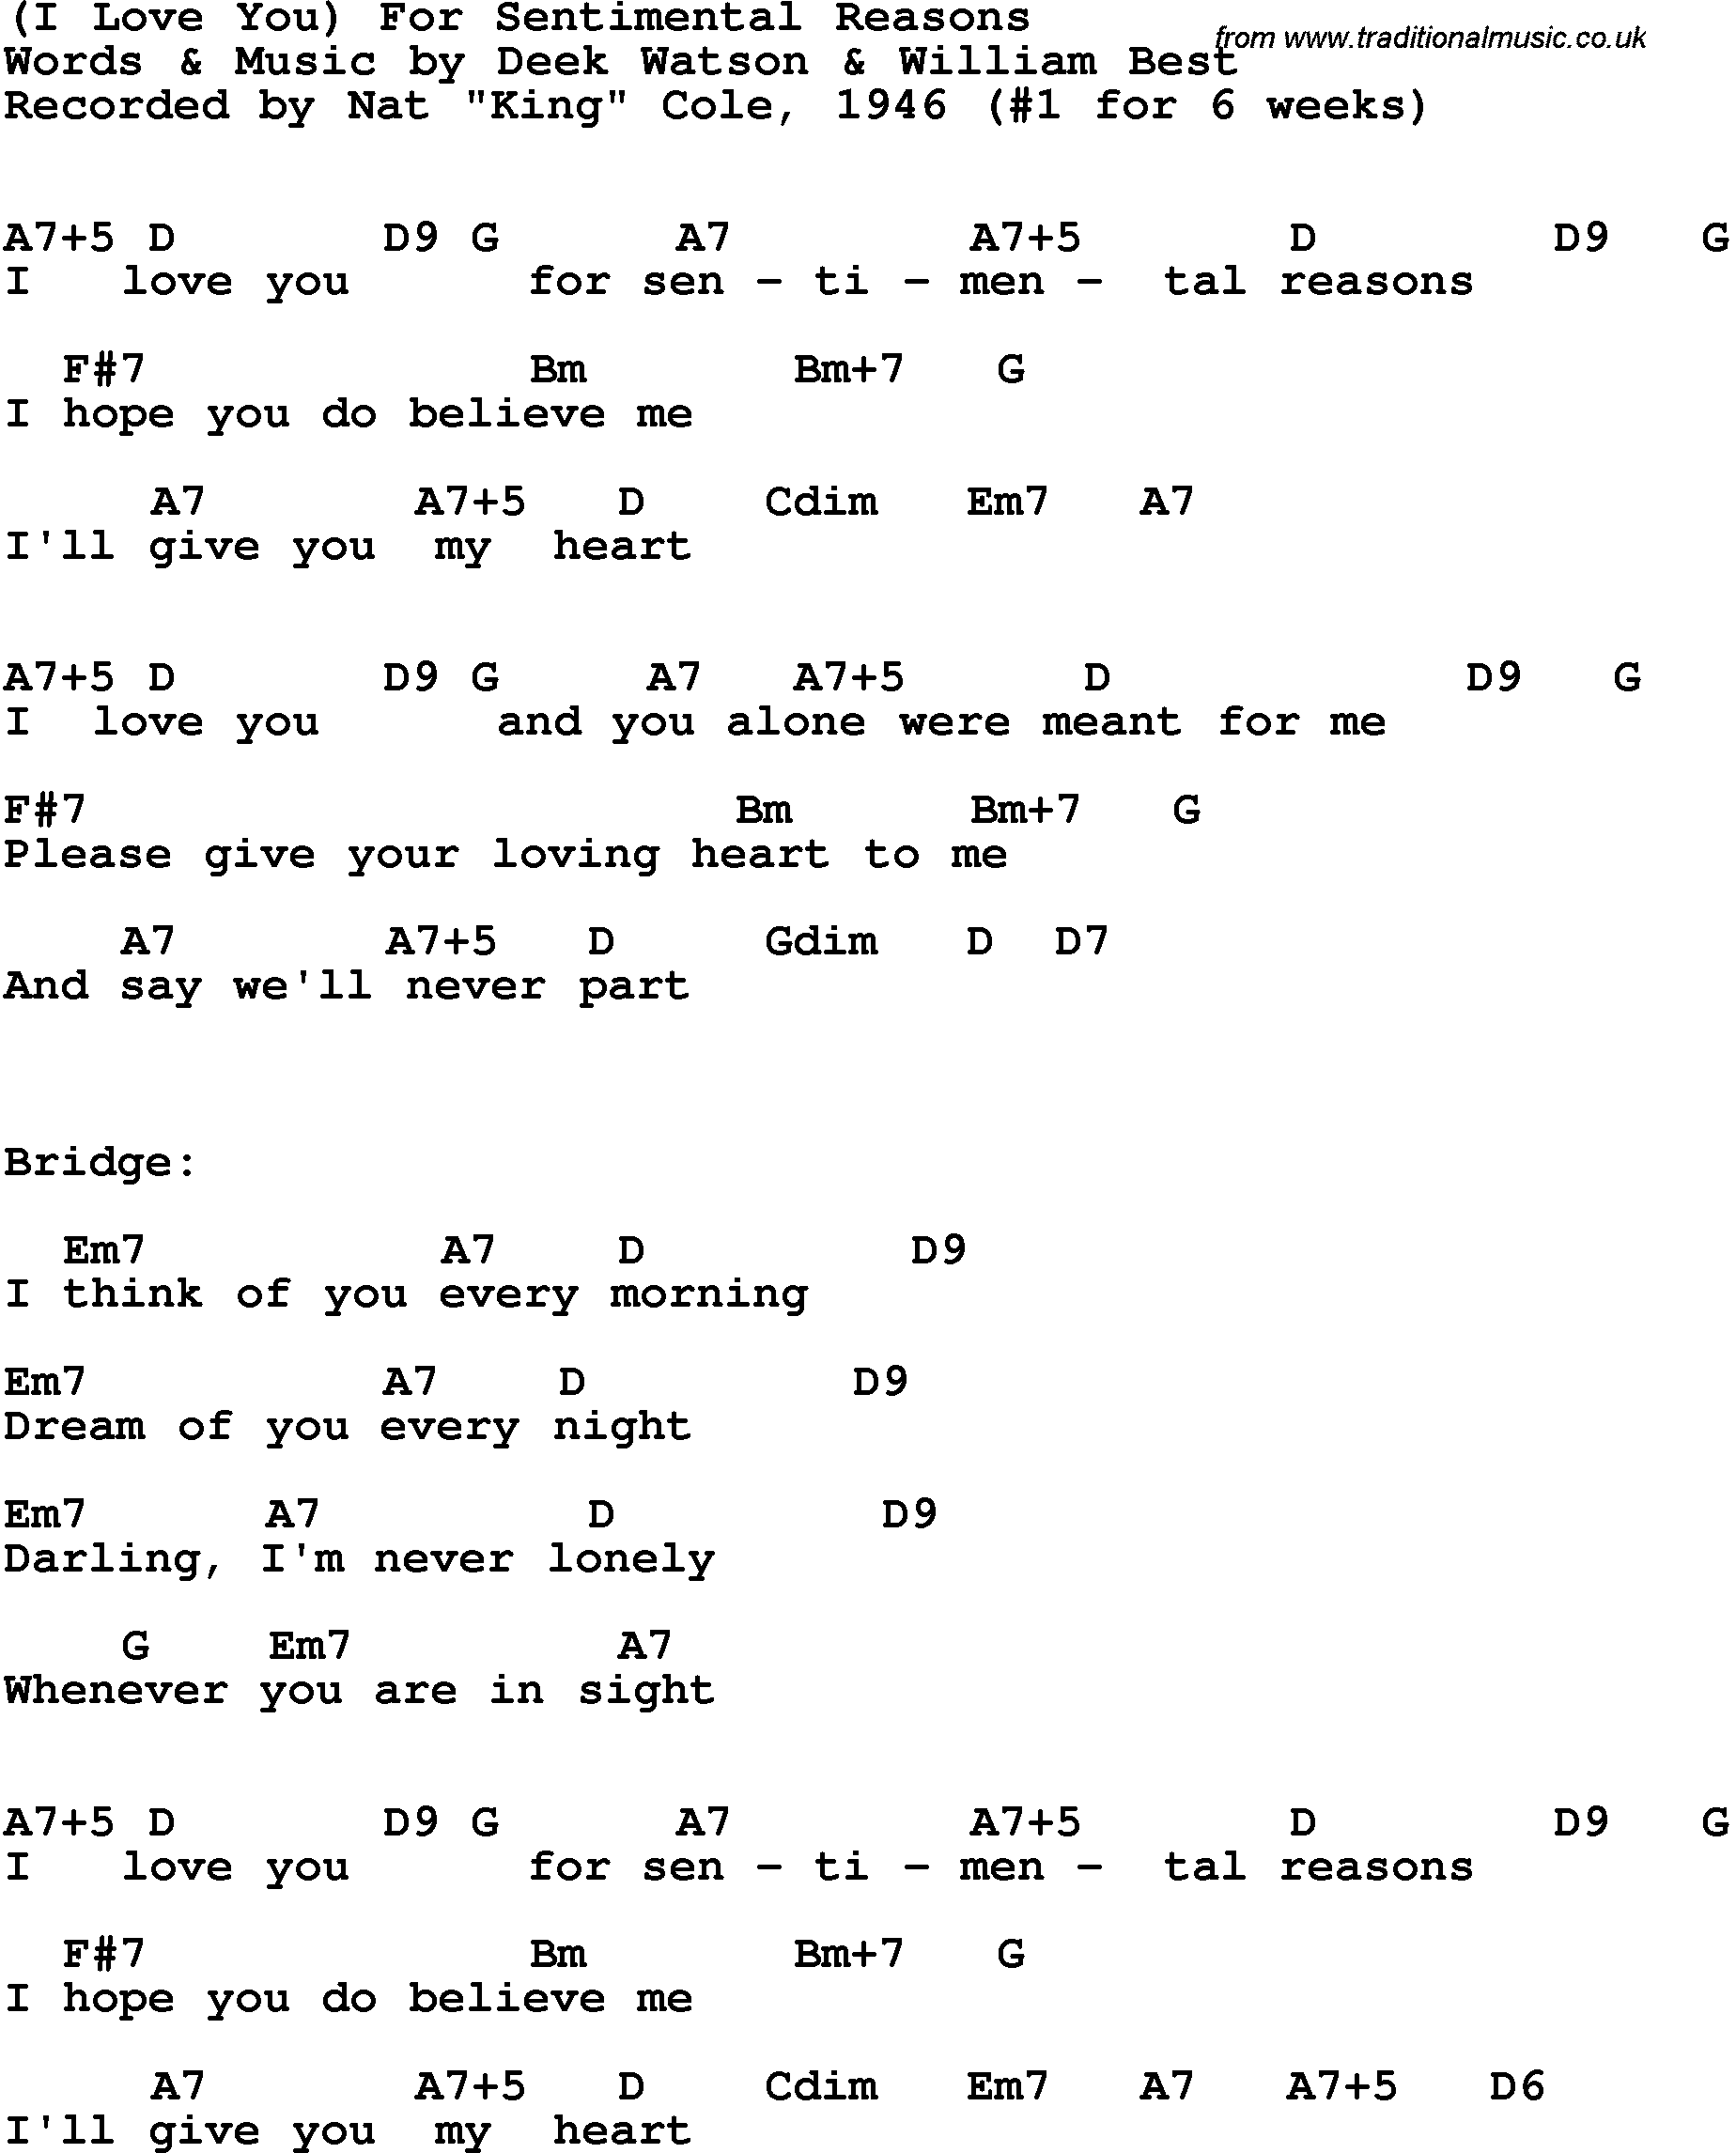 Song Lyrics with guitar chords for For Sentimental Reasons - Nat King Cole, 1946